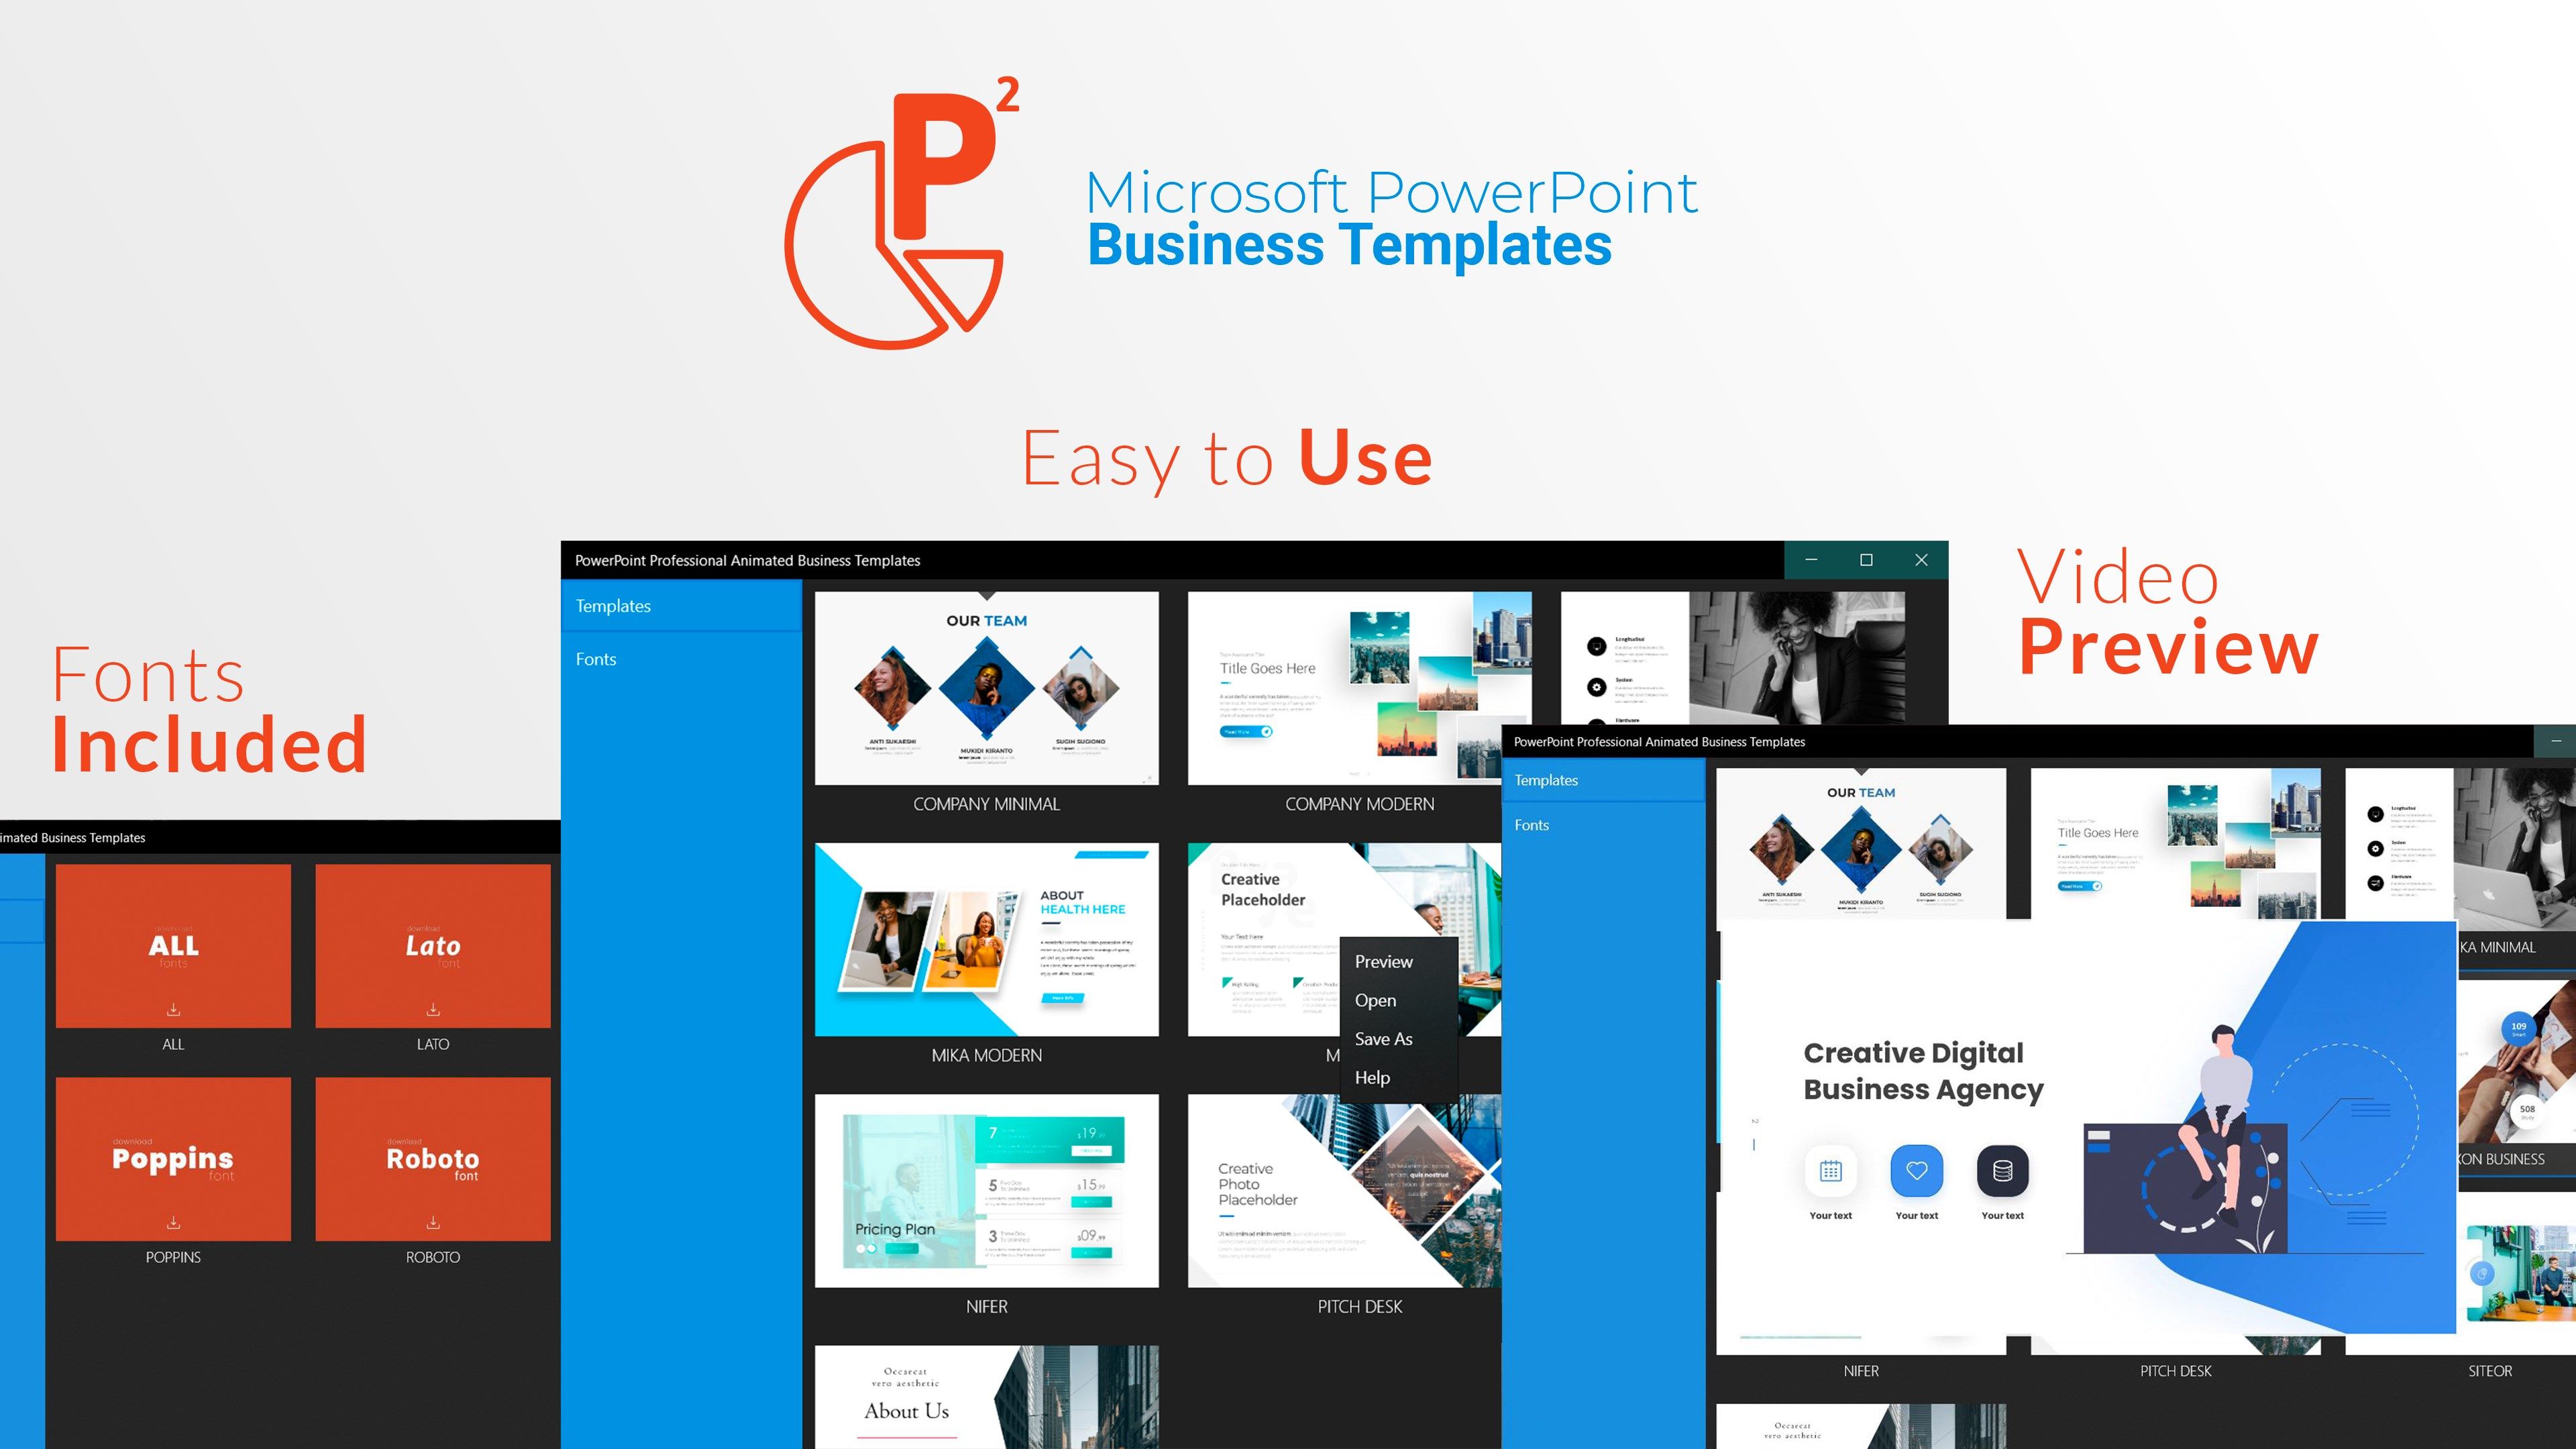 10 fully animated Microsoft PowerPoint templates with over 200 unique slides.